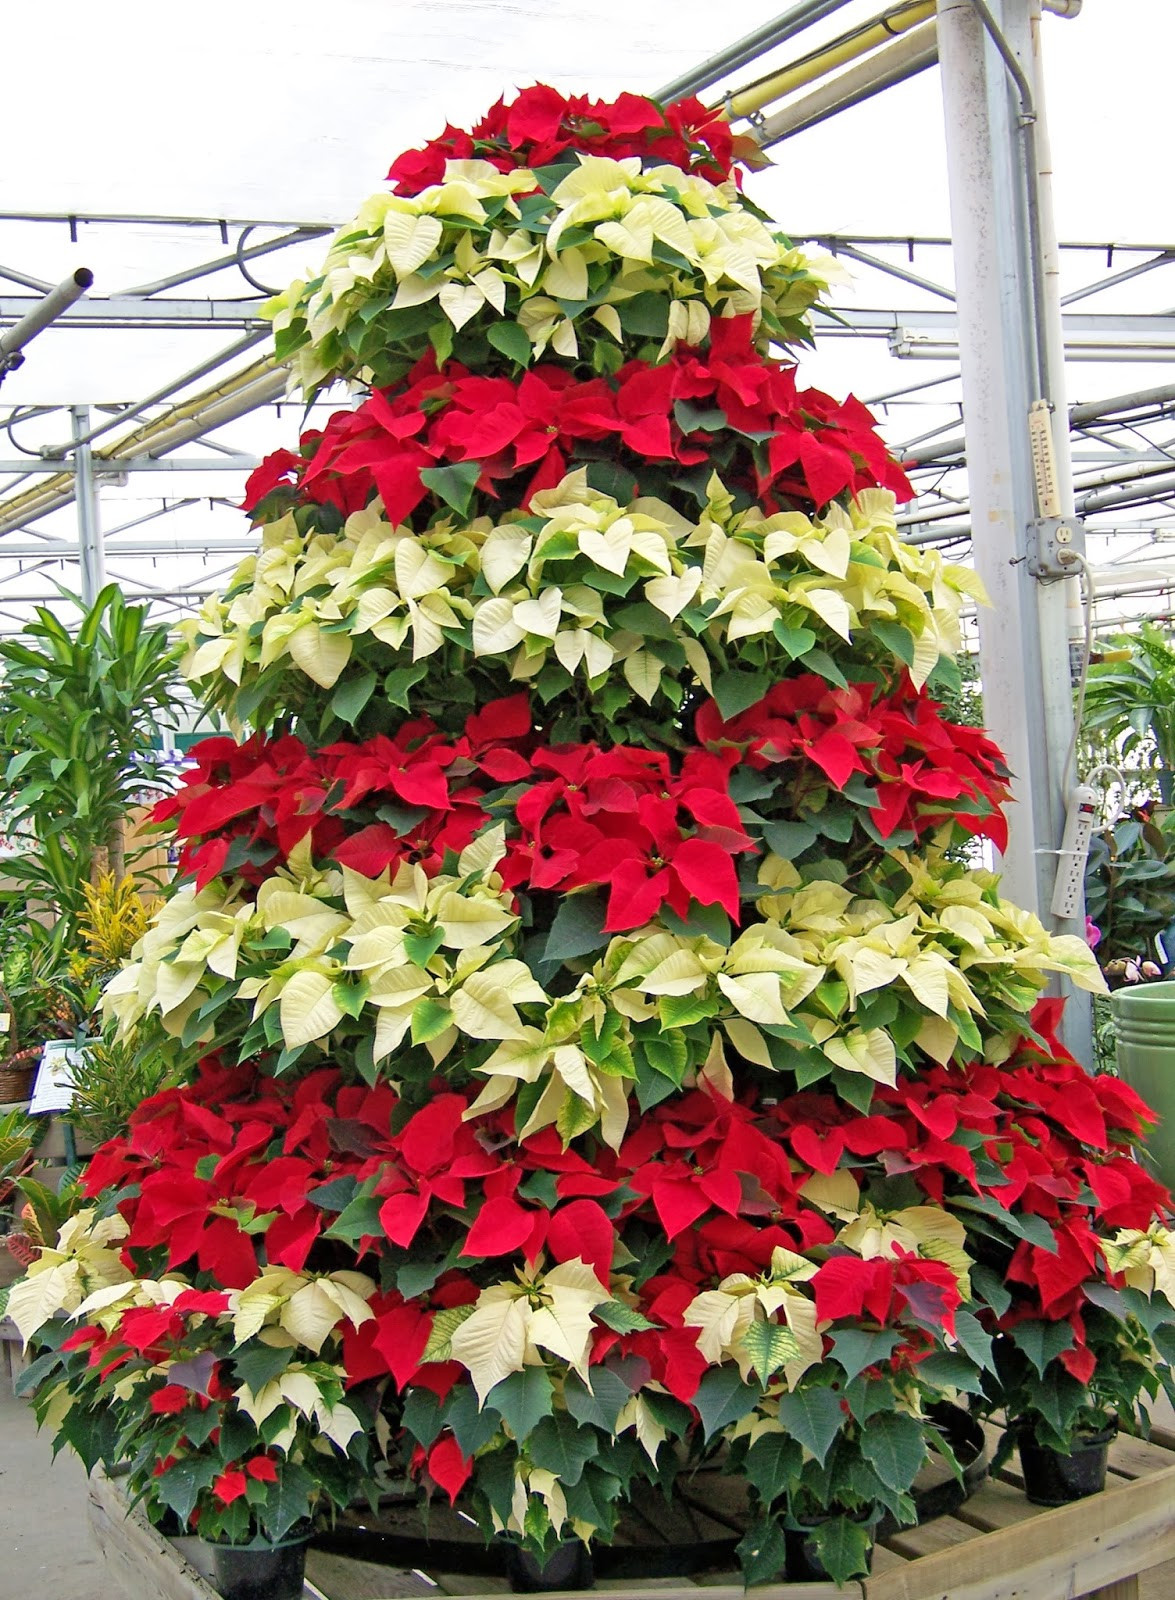 Flower Christmas Tree
 Decorating Your Home for Christmas